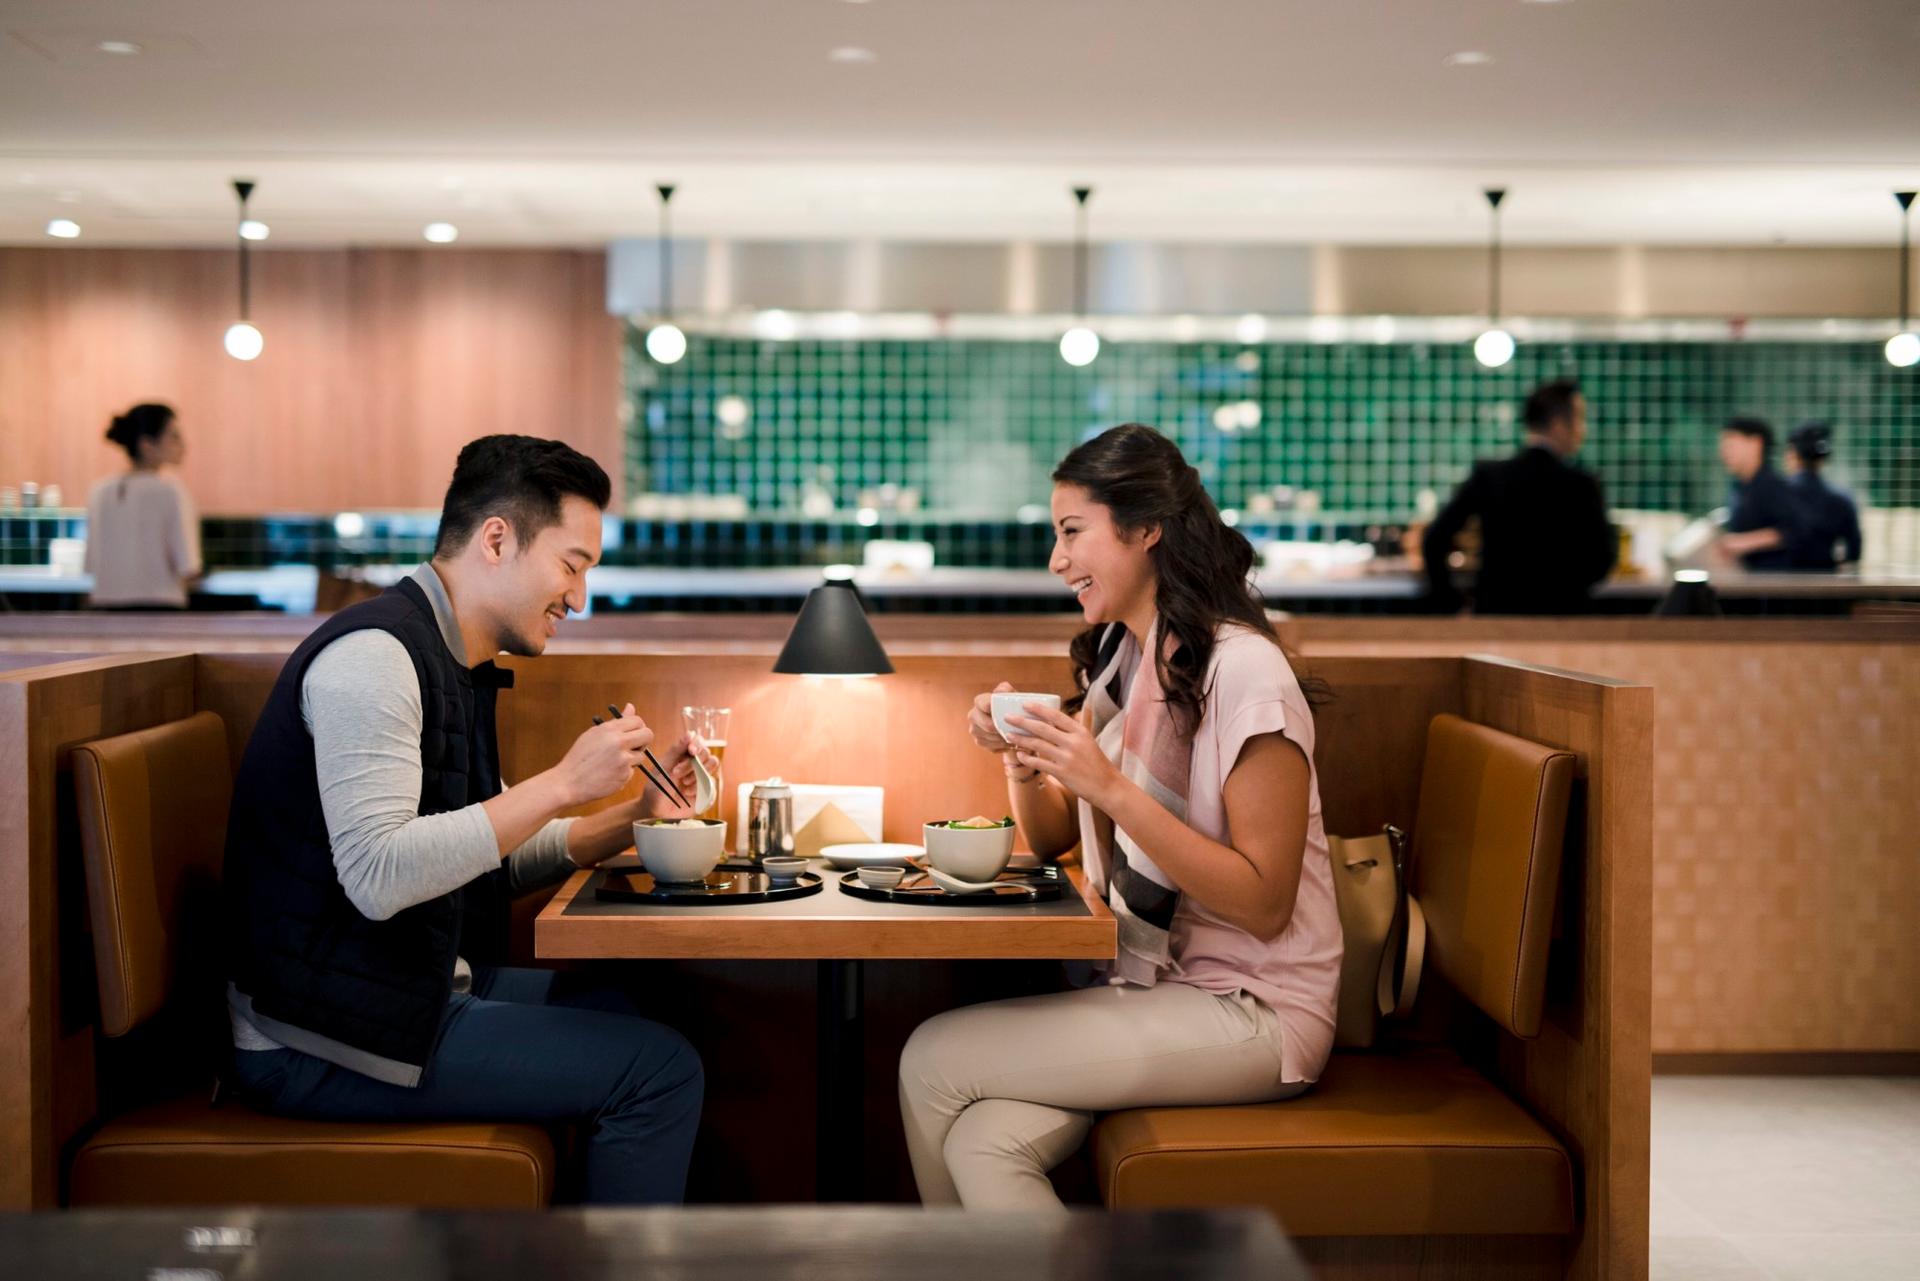 Cathay Pacific The Pier Business Class Lounge image 46 of 61